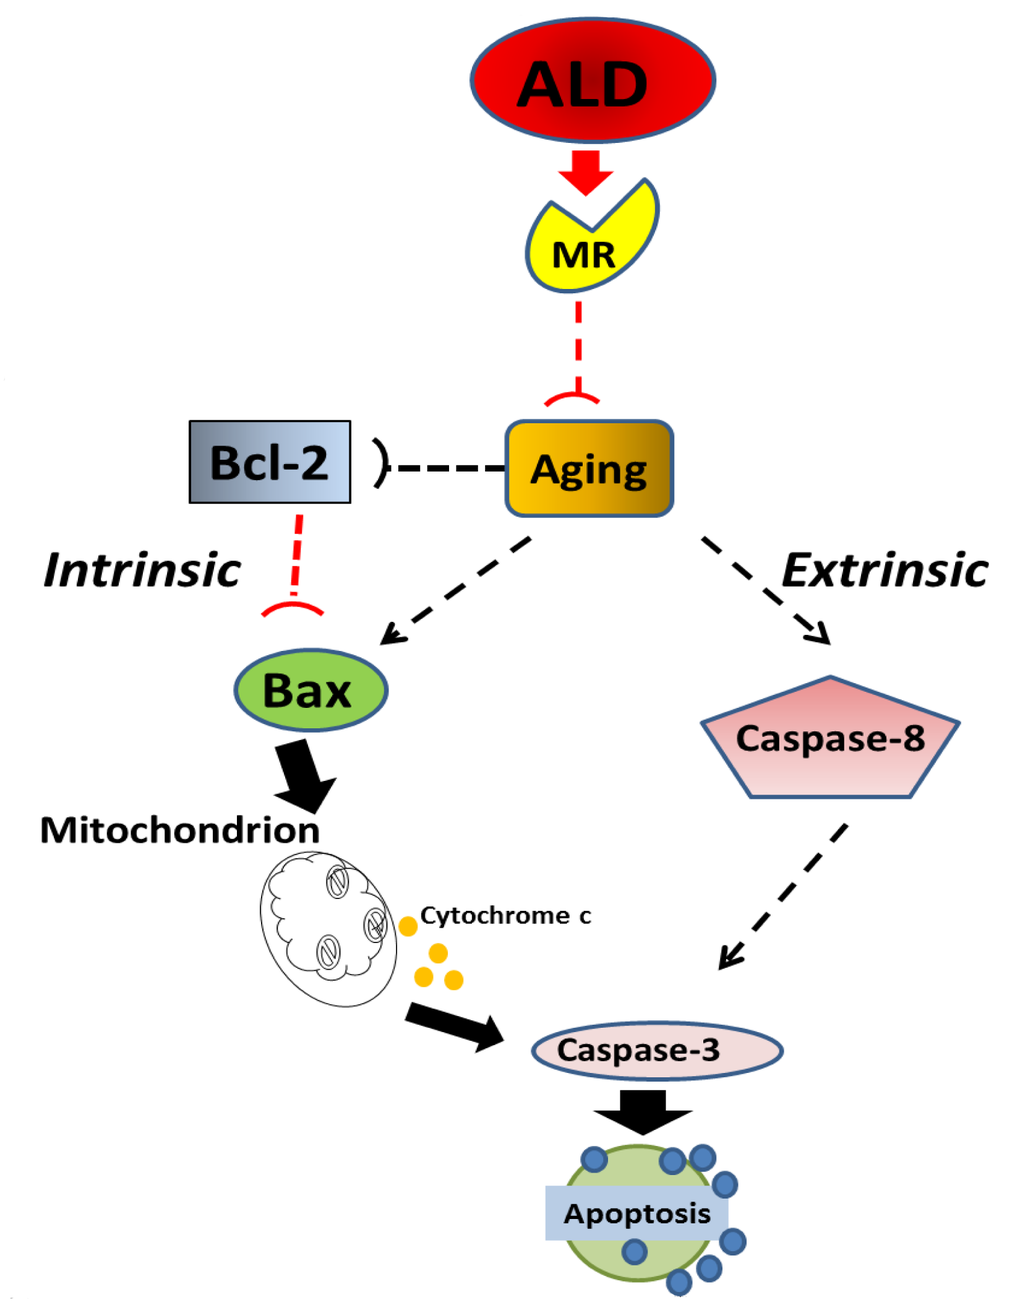 Schematic of the potential molecular pathways which illustrate the main findings of the present investigation, suggesting that ALD interferes with apoptotic pathways for aging in spiral ganglion neurons. Aging processes triggers Bcl-2 inhibition and Bax activation, which are key factors in intrinsic pathways, and promotes the caspase-dependent extrinsic pathway. Aldosterone, through the activation of cochlear mineralocorticoid receptors, blocks apoptotic processing induced by aging, i.e., Bcl-2 is increased and Bax is decreased to inhibit the intrinsic apoptosis induced by aging, Caspase-dependent pathways are also inhibited.